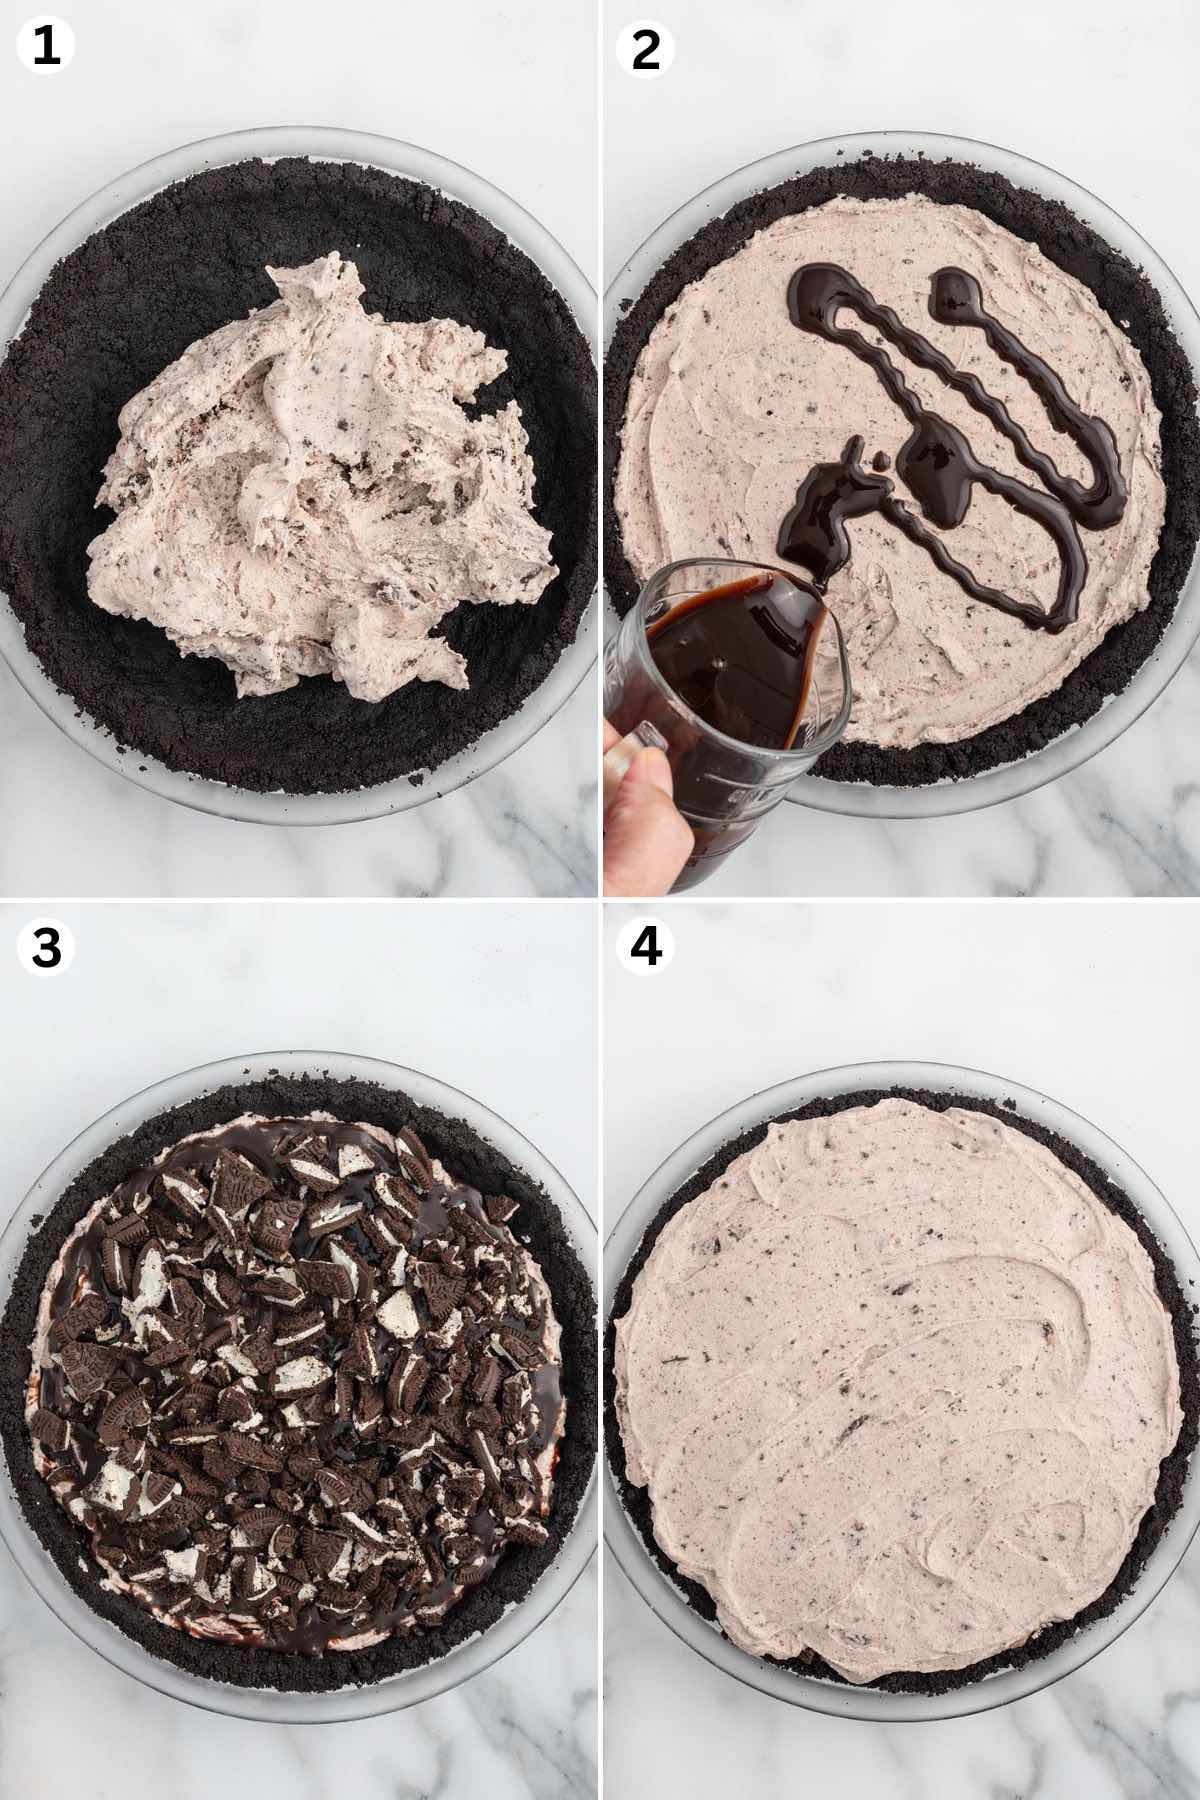 Press the buttered crumbs into the bottom to form the crust. Add the ice cream. Drizzle with chocolate sauce. Sprinkle chopped cookies over the chocolate sauce. Add ice cream over the cookie layer.